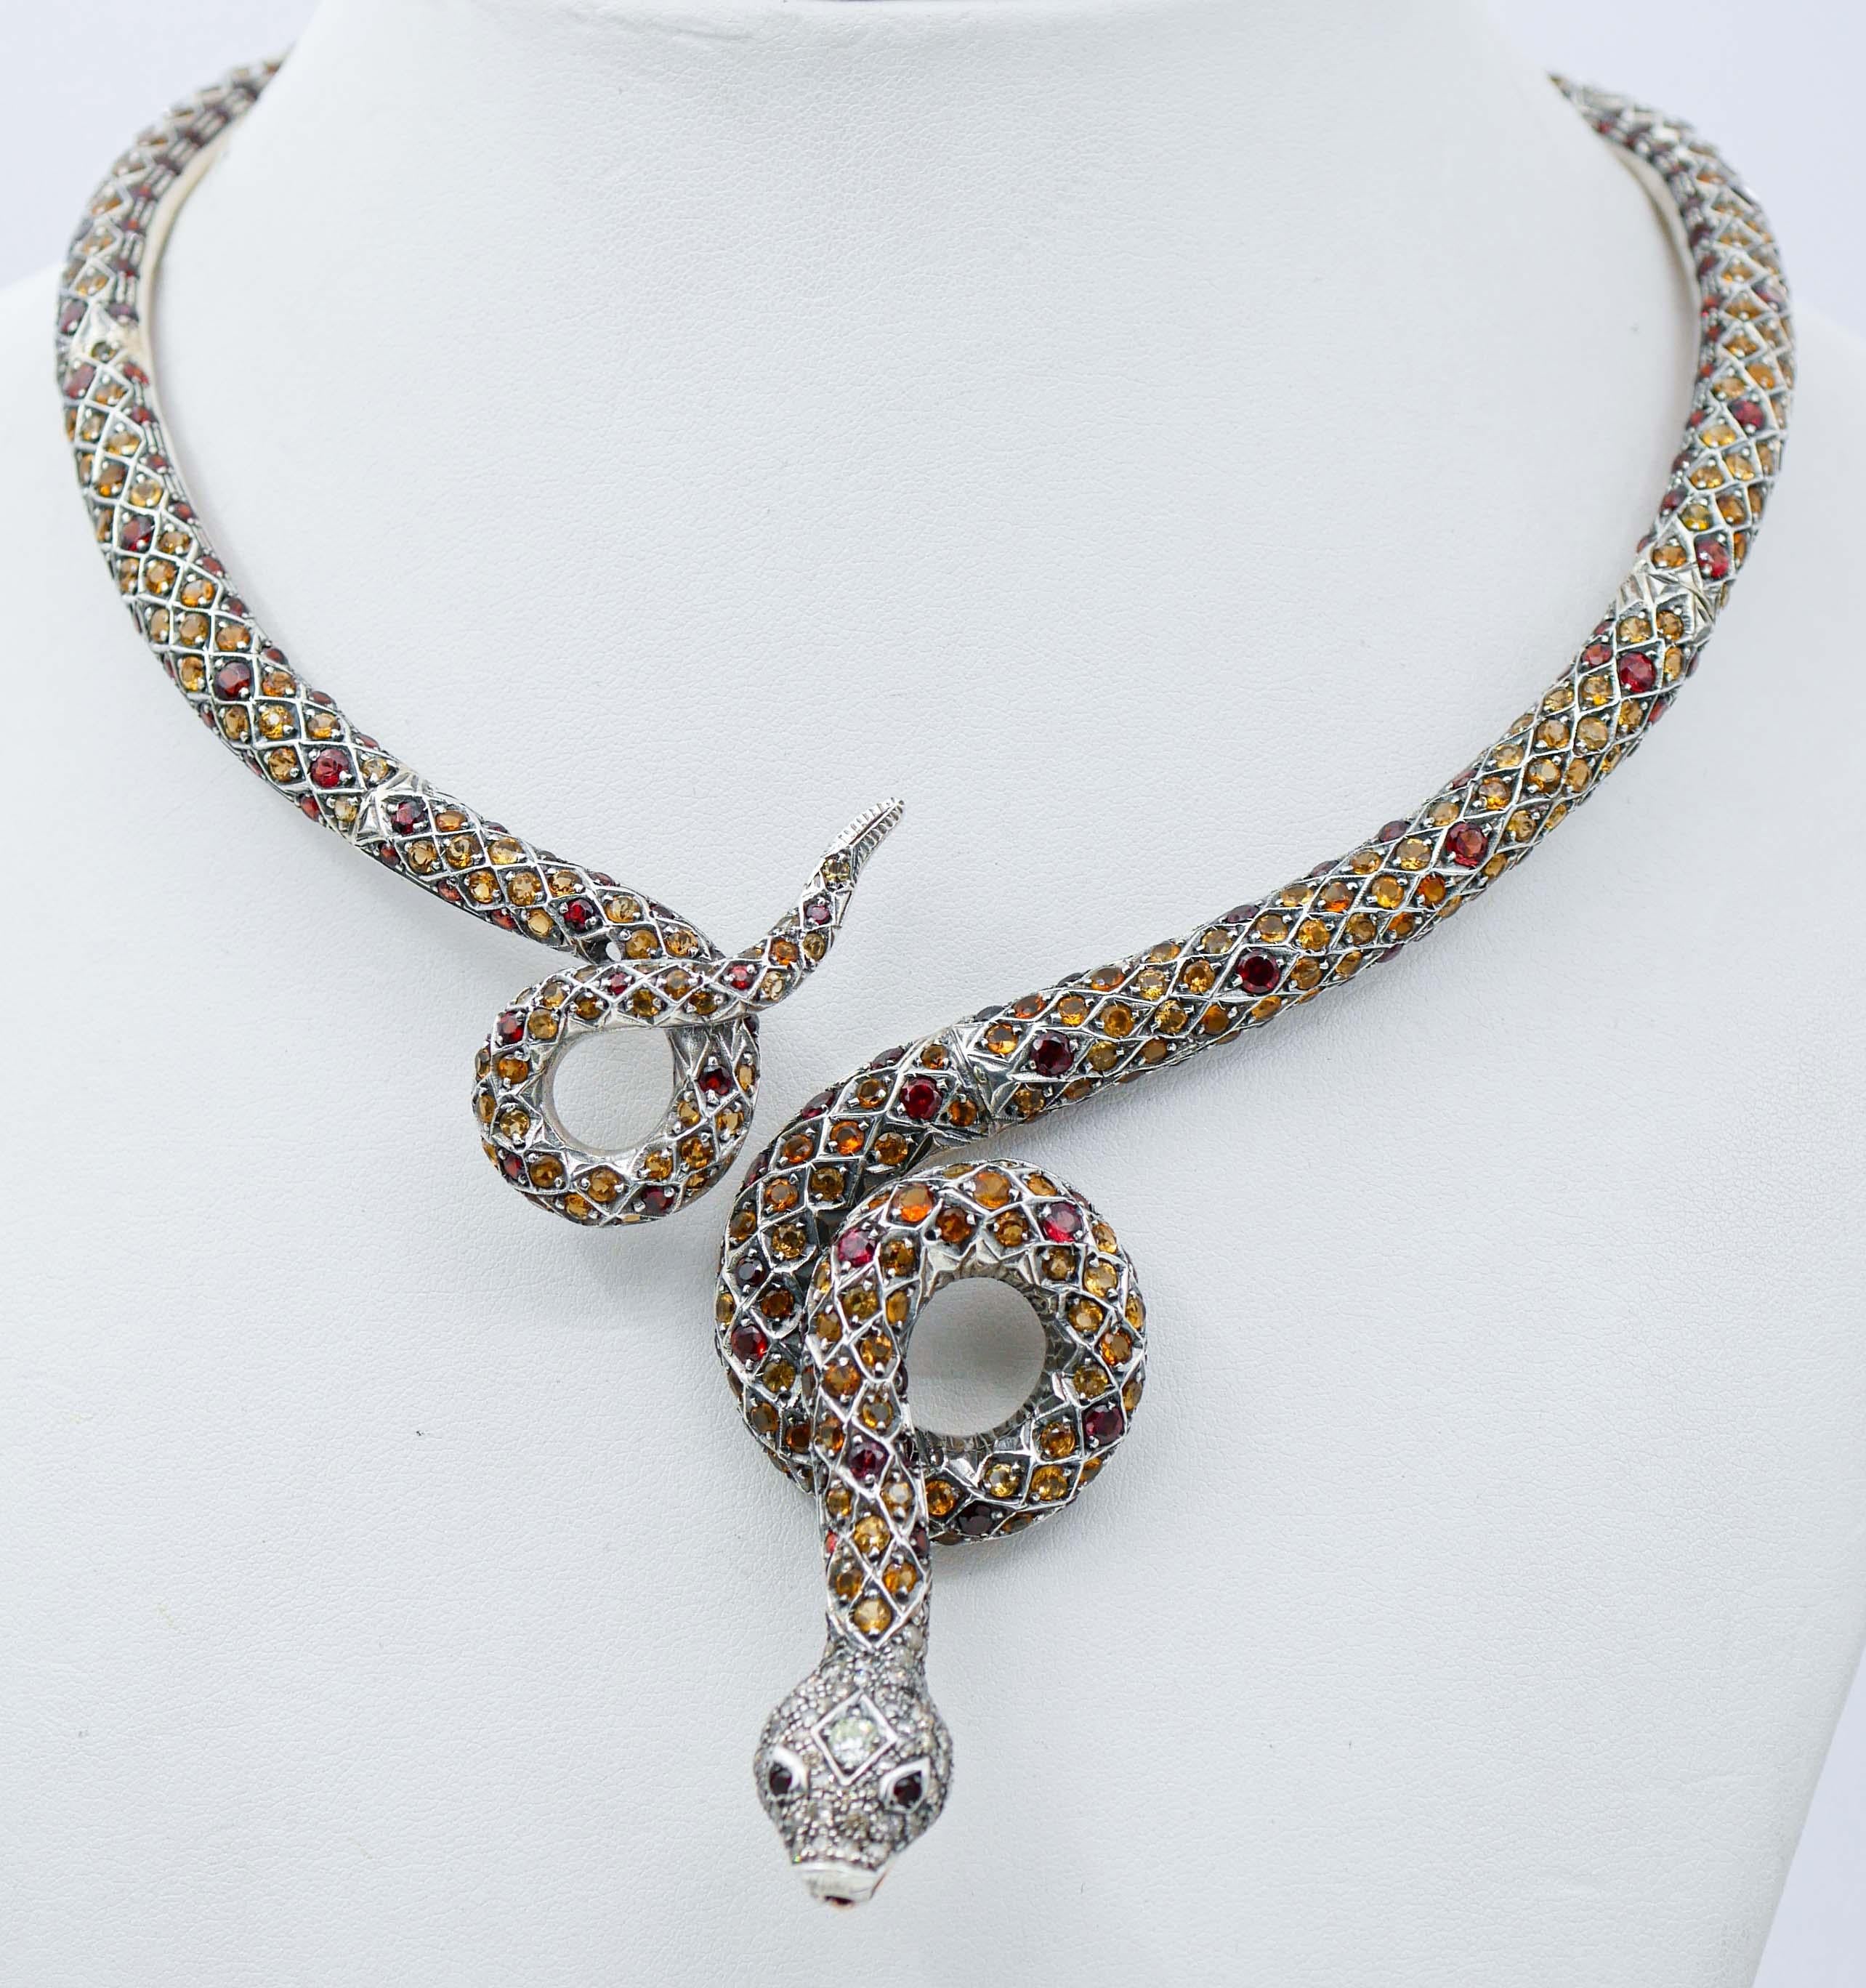 SHIPPING POLICY: 
No additional costs will be added to this order. 
Shipping costs will be totally covered by the seller (customs duties included).

Beautiful snake necklace  in 9kt rose gold and silver structure. The snake body is  covered with